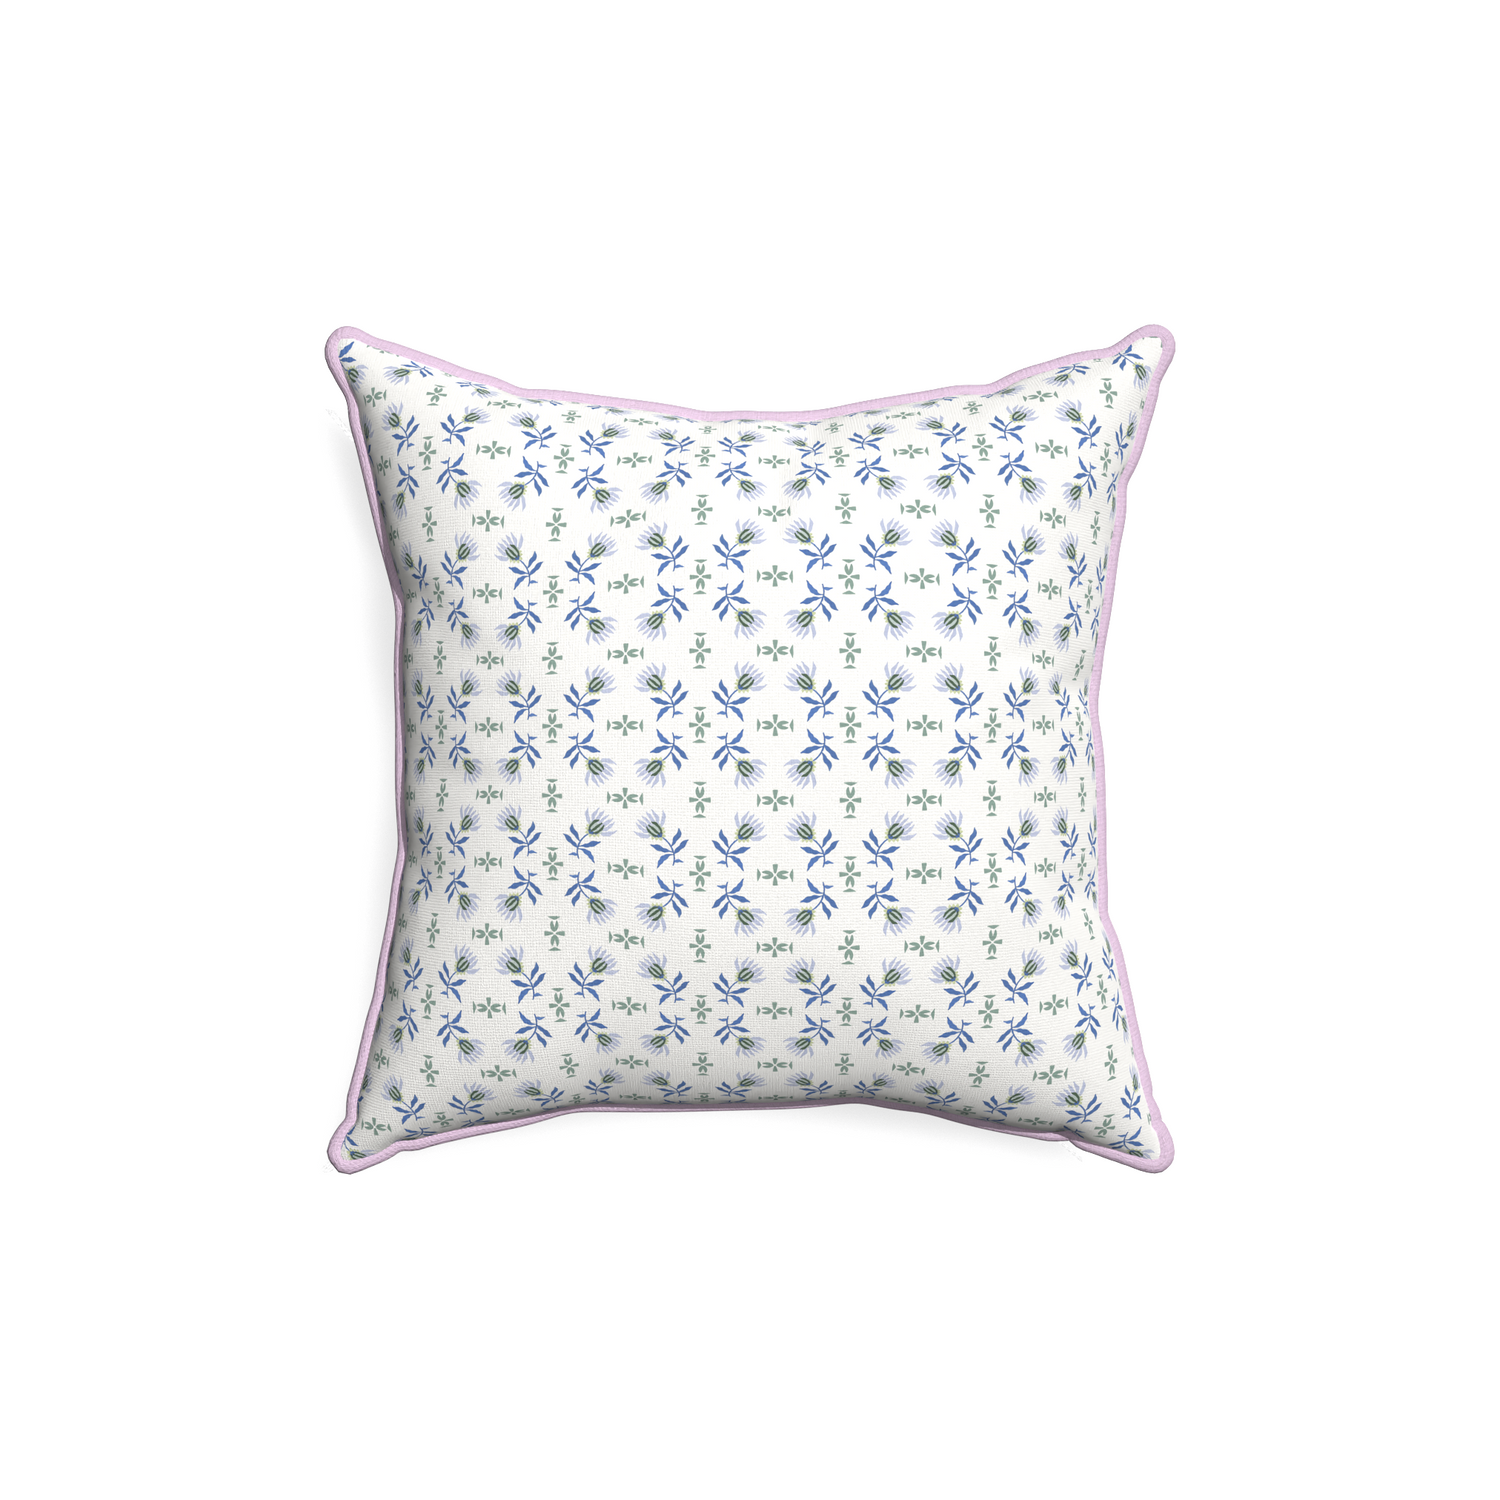 18-square lee custom blue & green floralpillow with l piping on white background